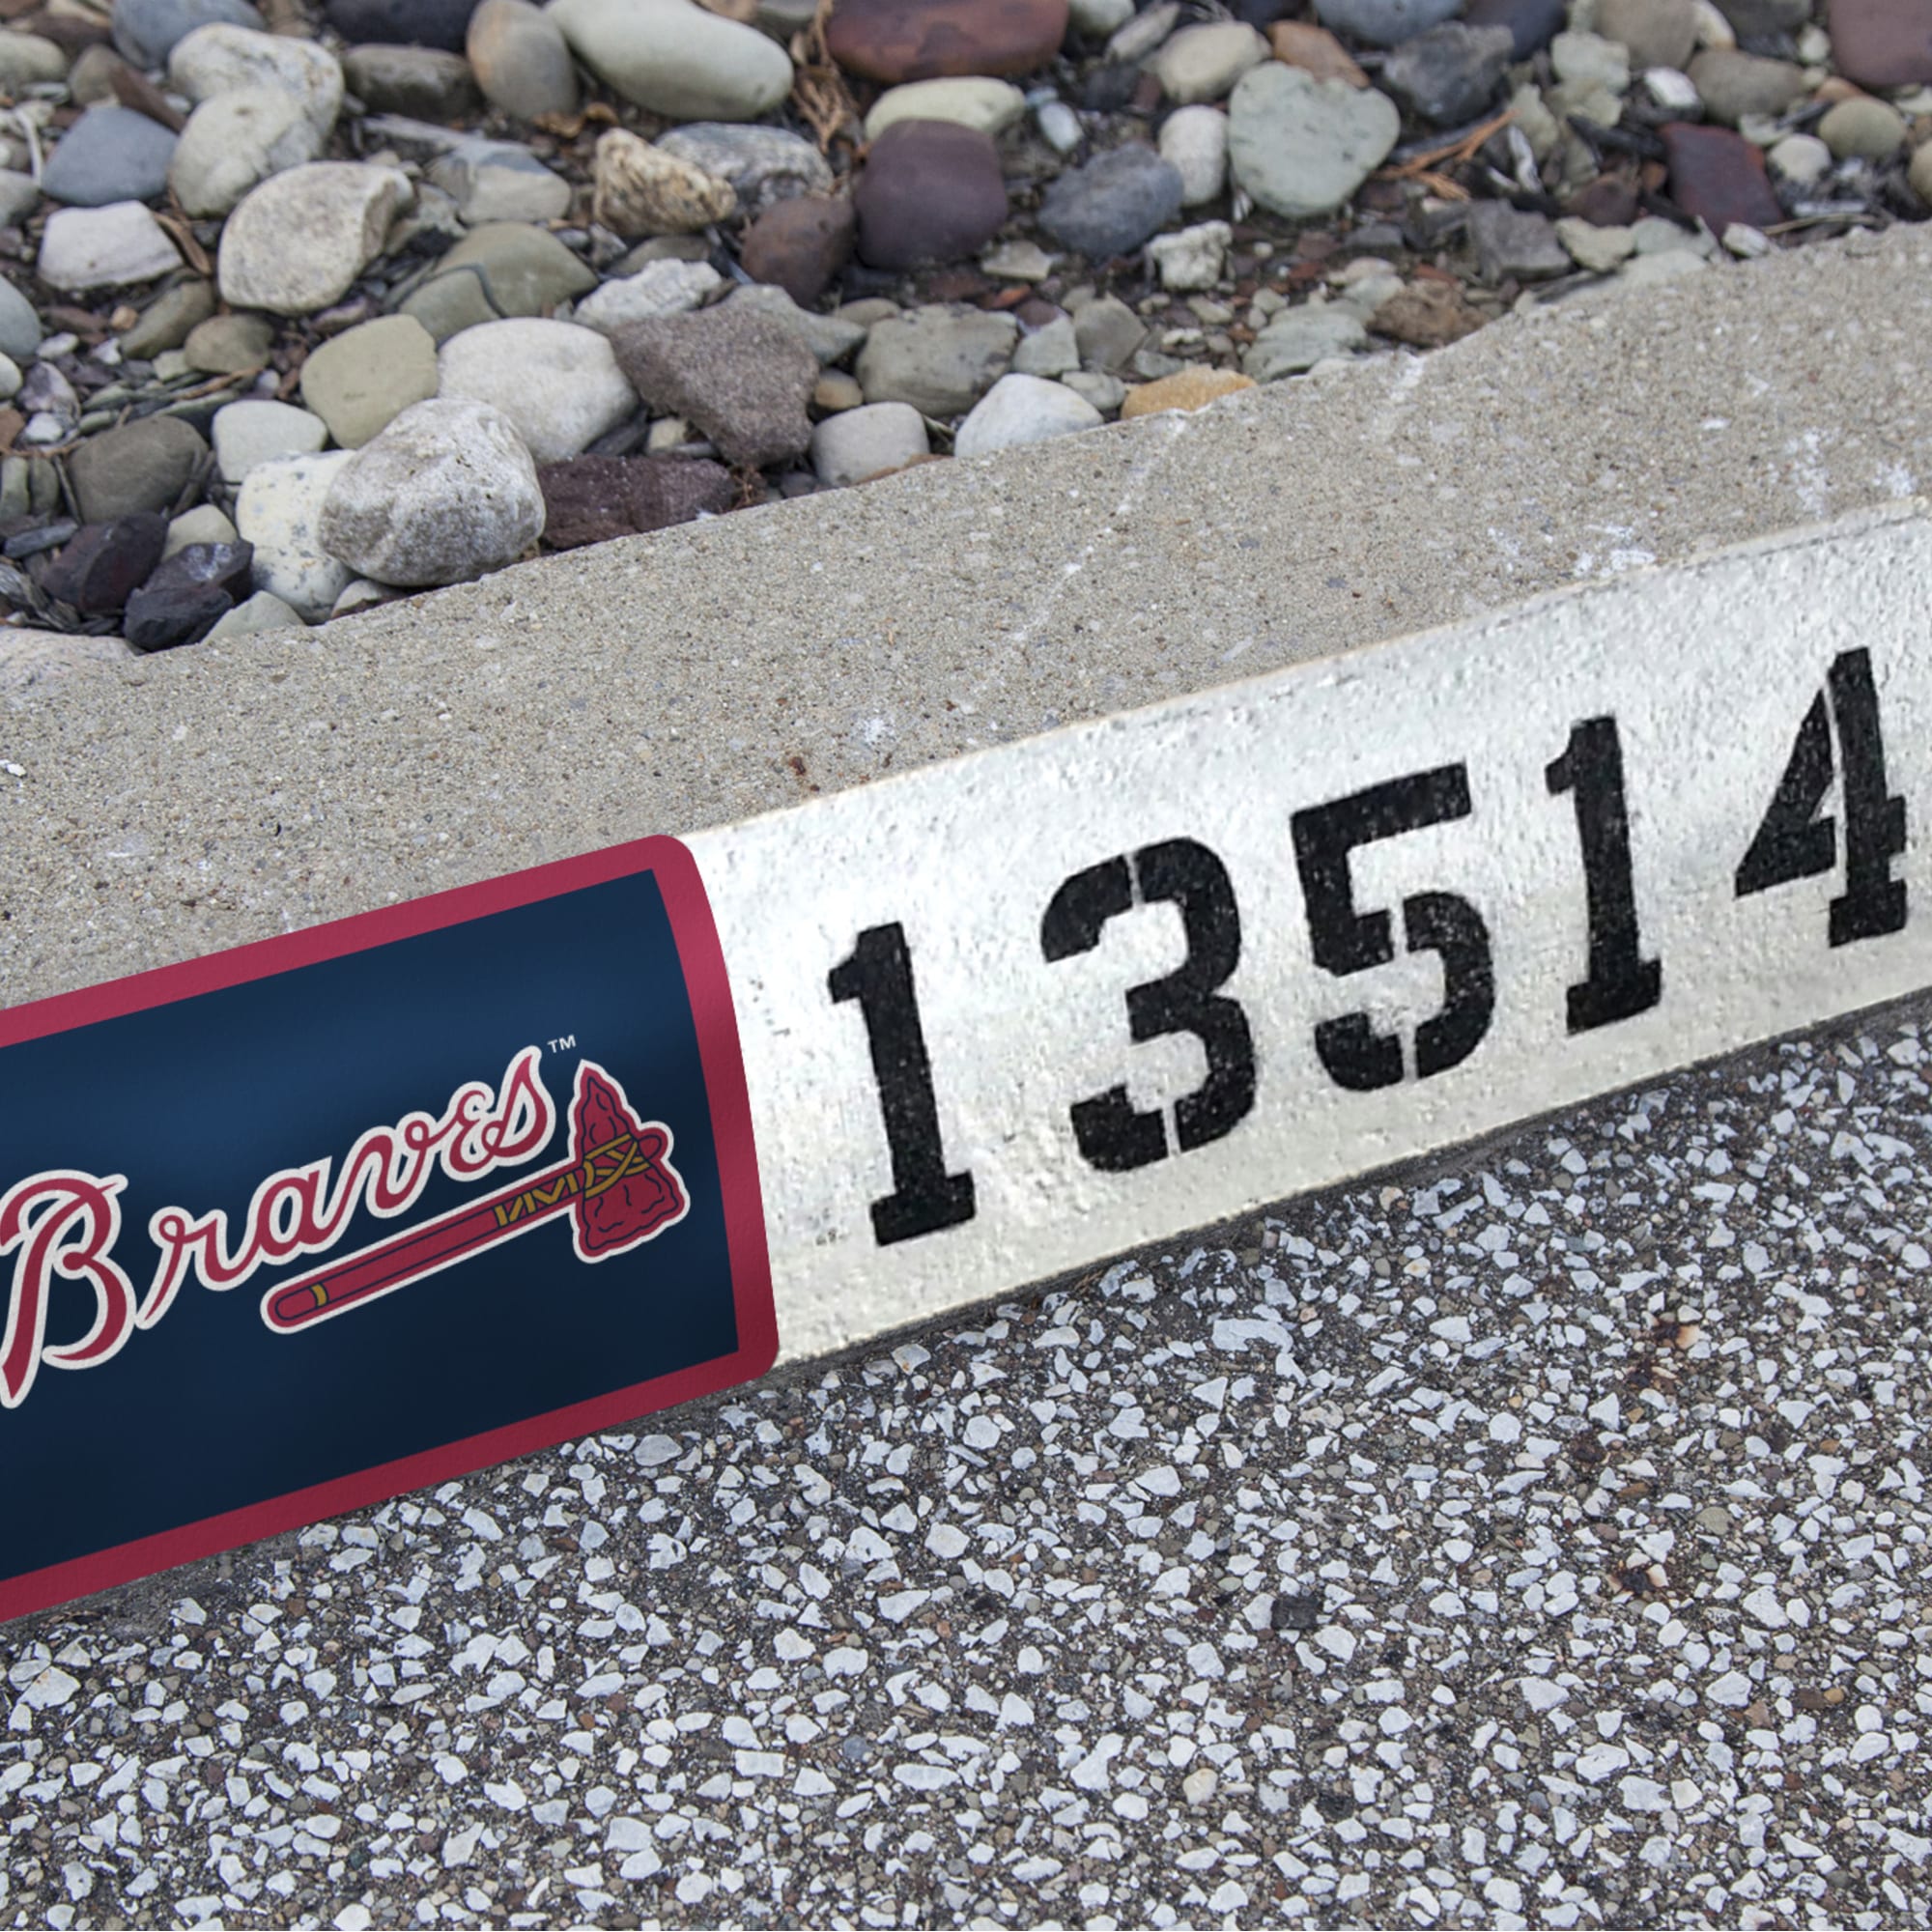 Atlanta Braves: Address Block - Officially Licensed MLB Outdoor Graphic 6.0"W x 8.0"H by Fathead | Wood/Aluminum